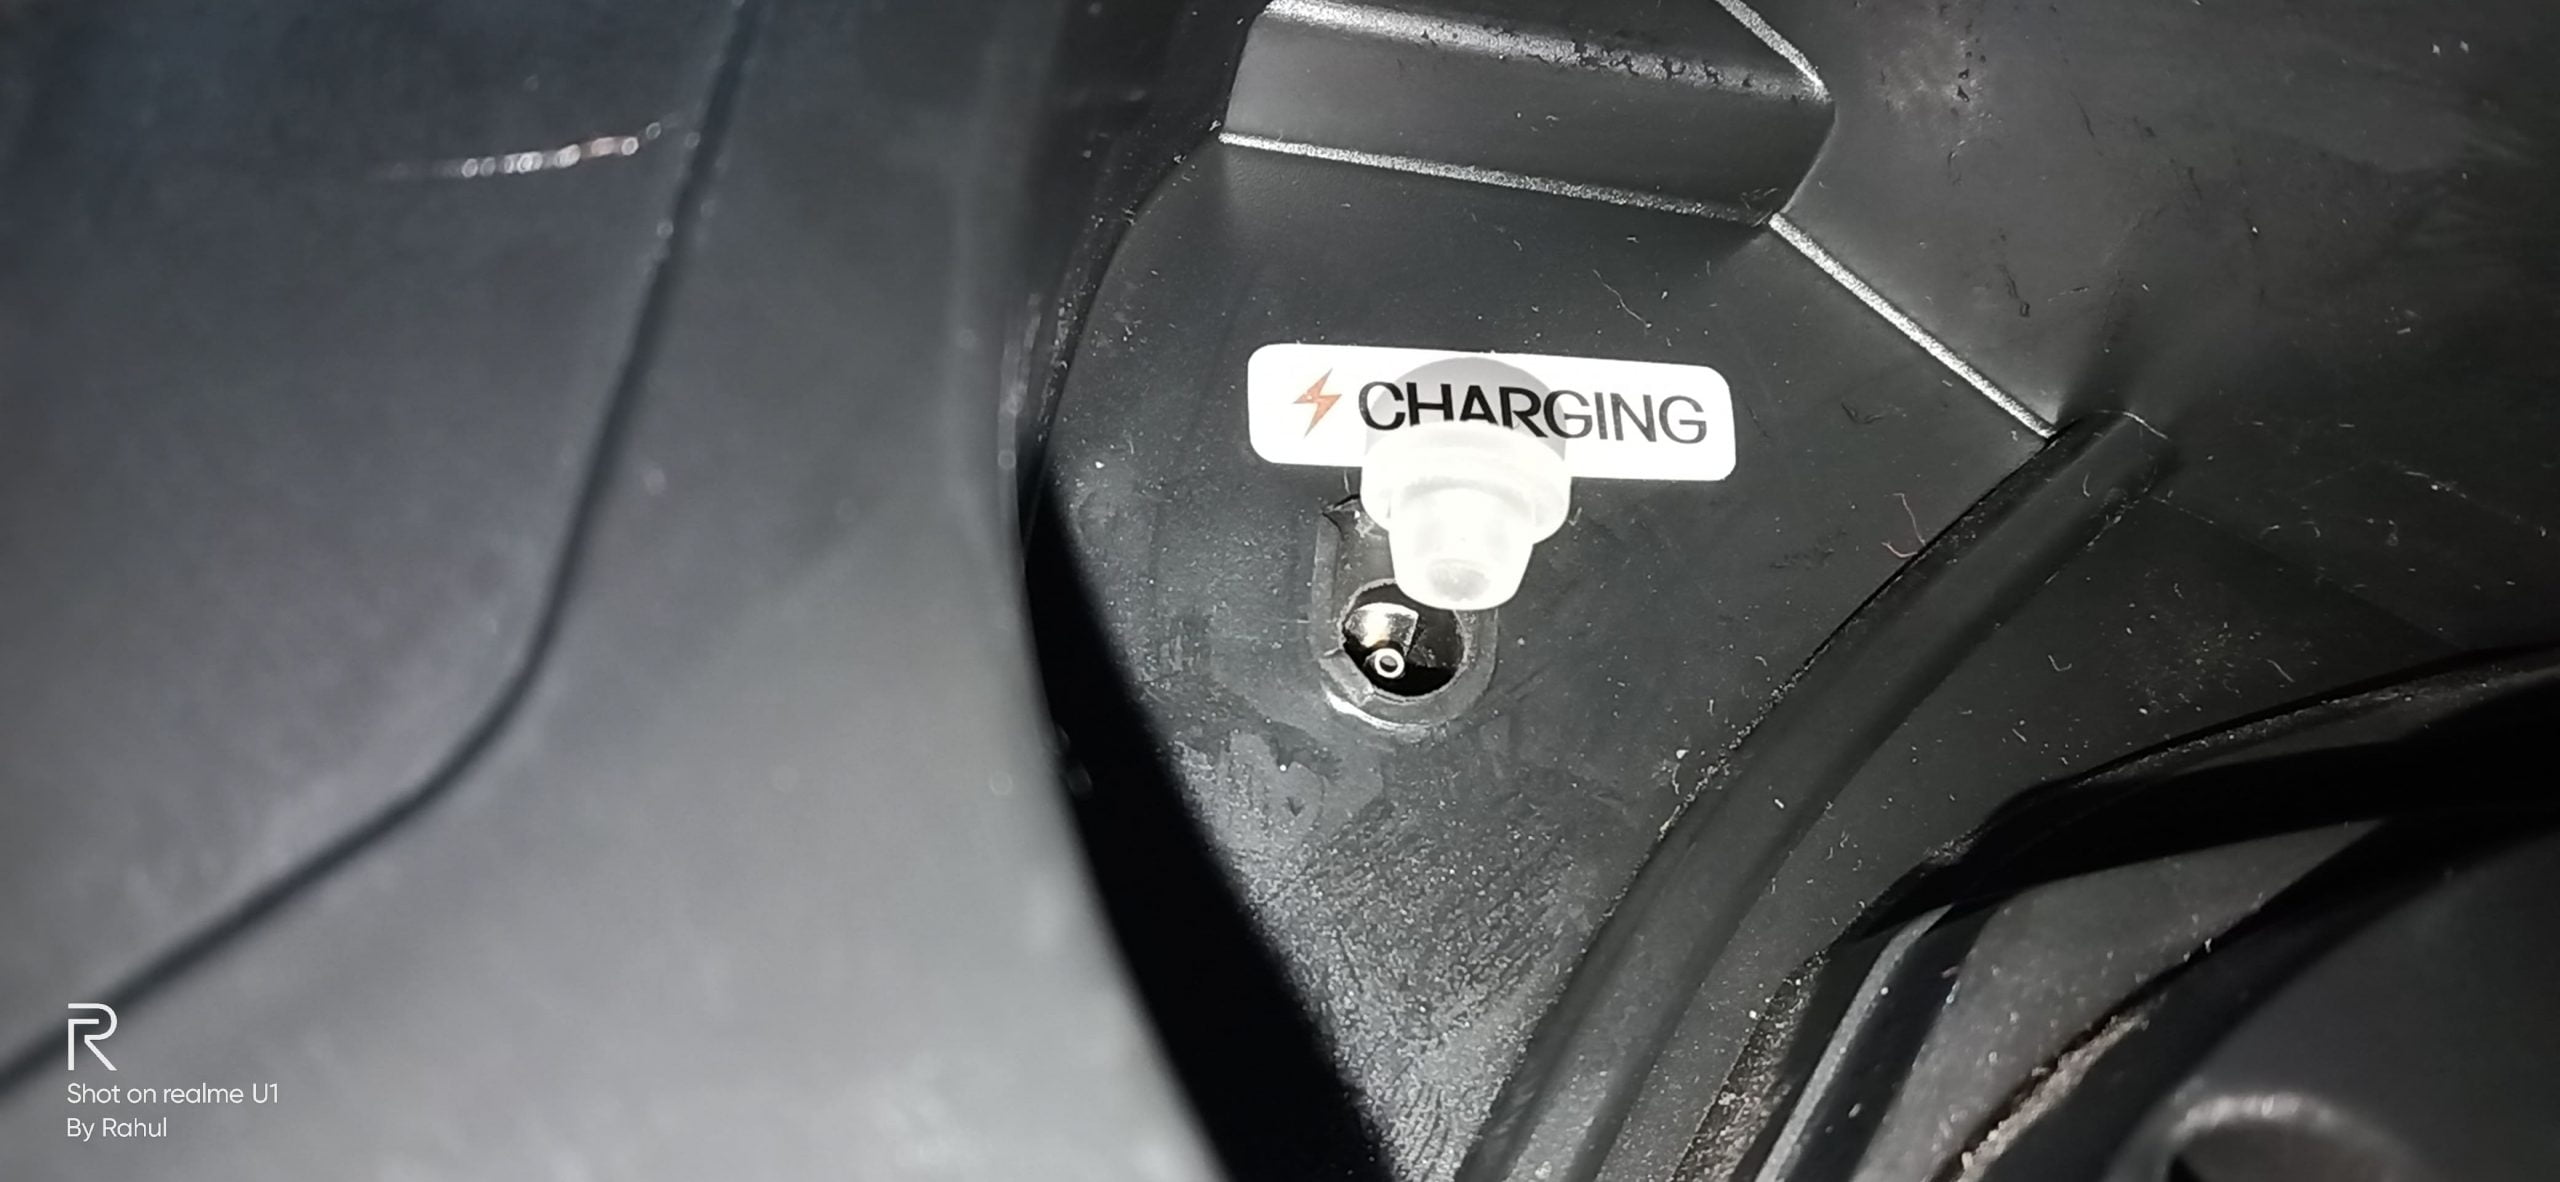 Charging point of electrical bike